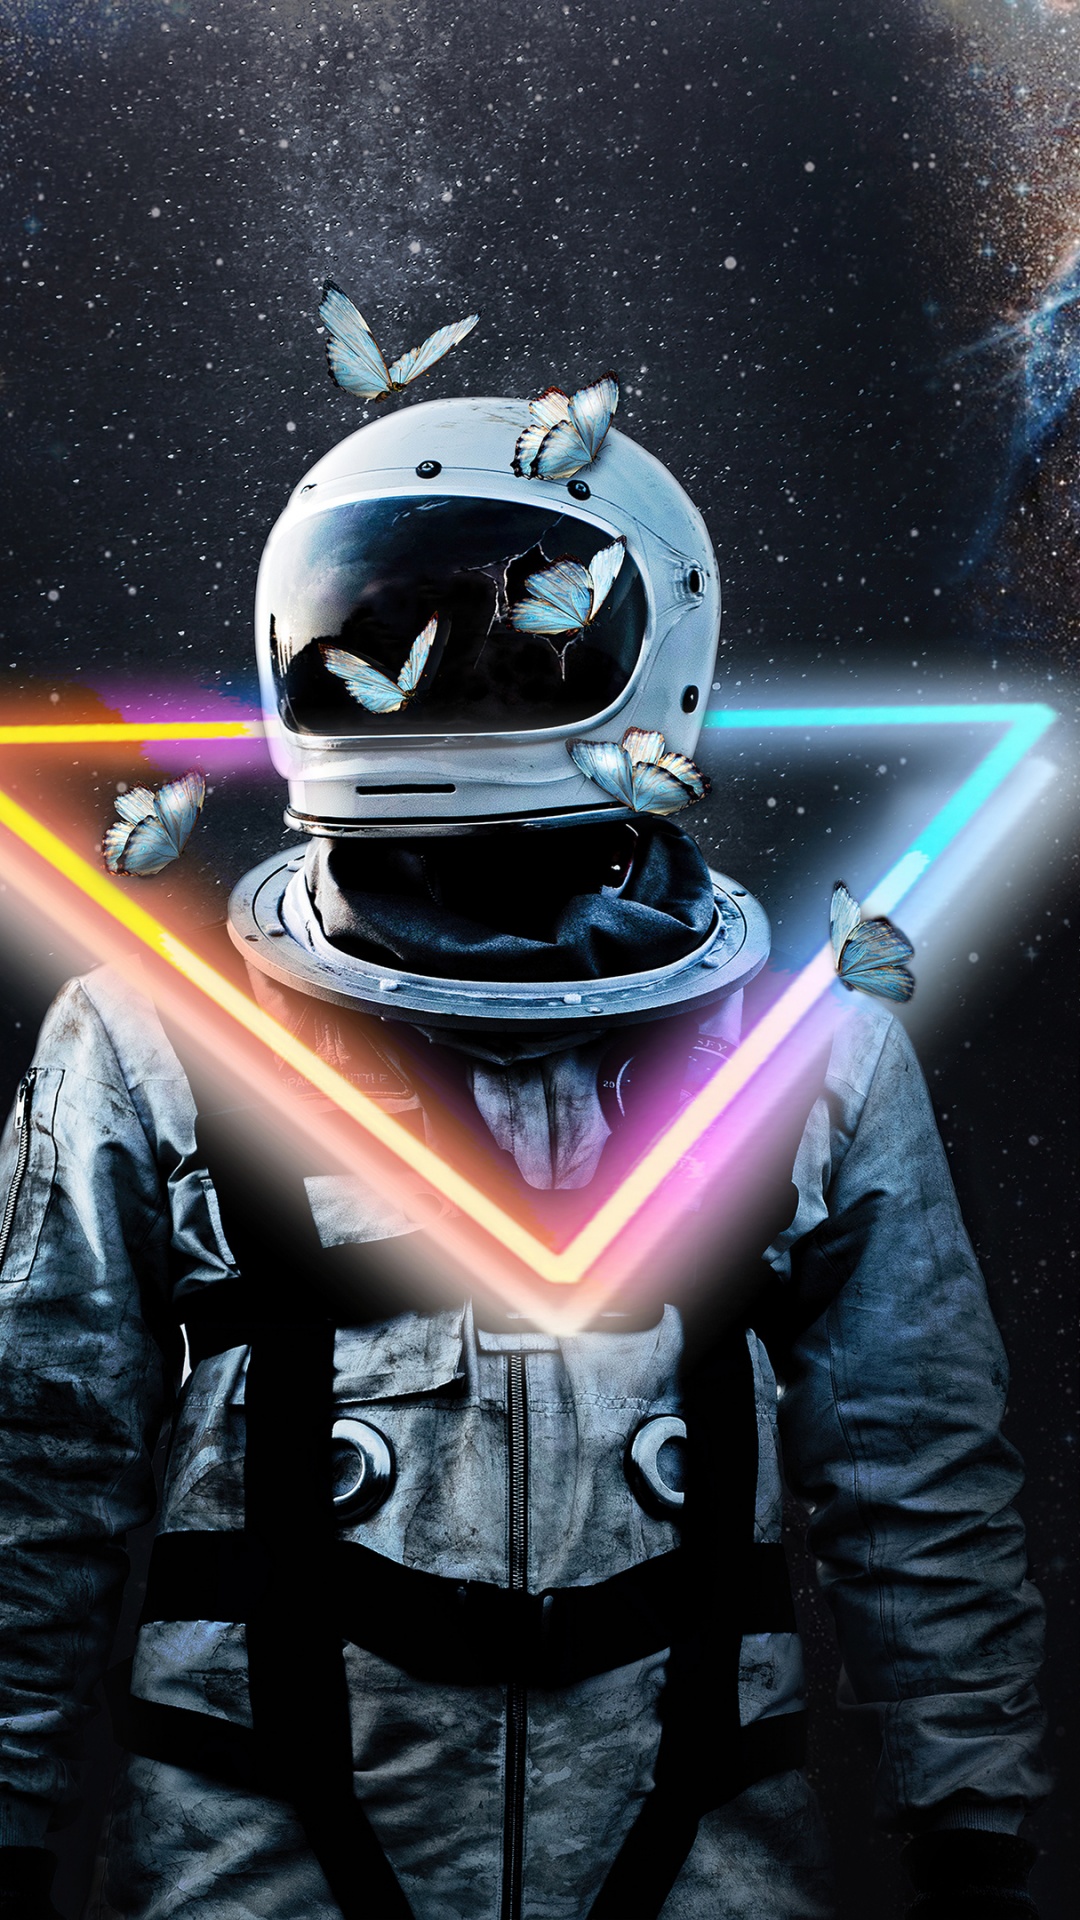 Wallpaper Astronaut Amoled Black Aesthetic Space Space Aesthetics  Background  Download Free Image